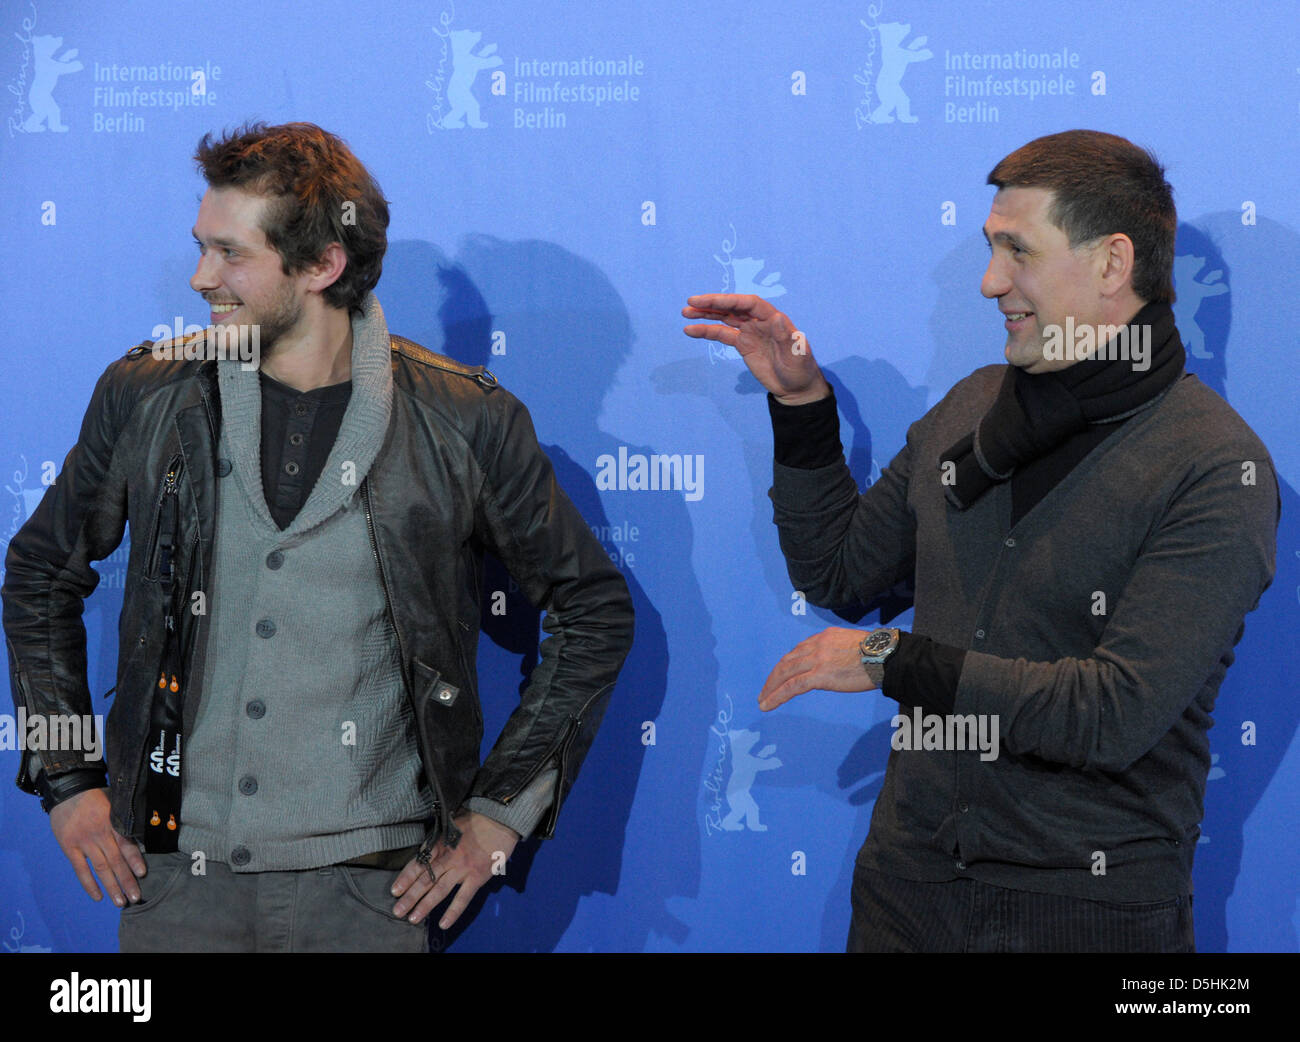 Russian actors Grigory Dobrygin (L) and Sergei Puskepalis pose during the photocall of the film 'How I Ended This Summer' running in competition during the 60th Berlinale International Film Festival in Berlin, Germany, Wednesday, 17 February 2010. The festival runs until 21 Febuary 2010. Photo: Soeren Stache dpa/lbn Stock Photo